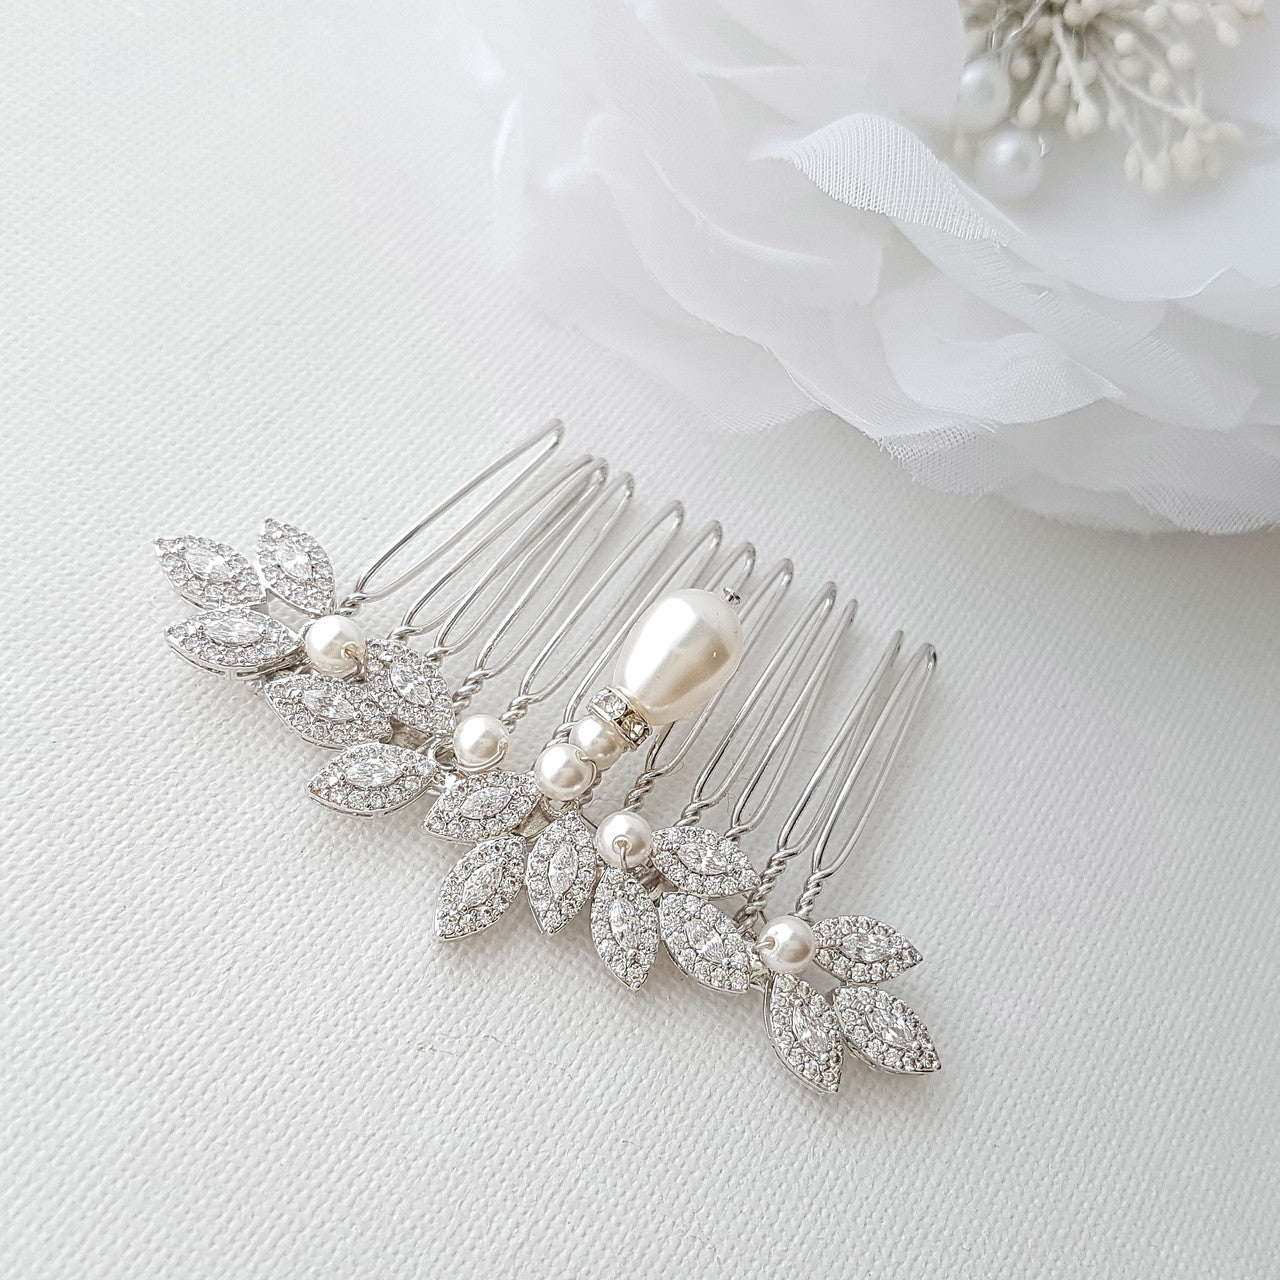 Gold Hair Comb for Weddings with Pearl & Crystals-Abby